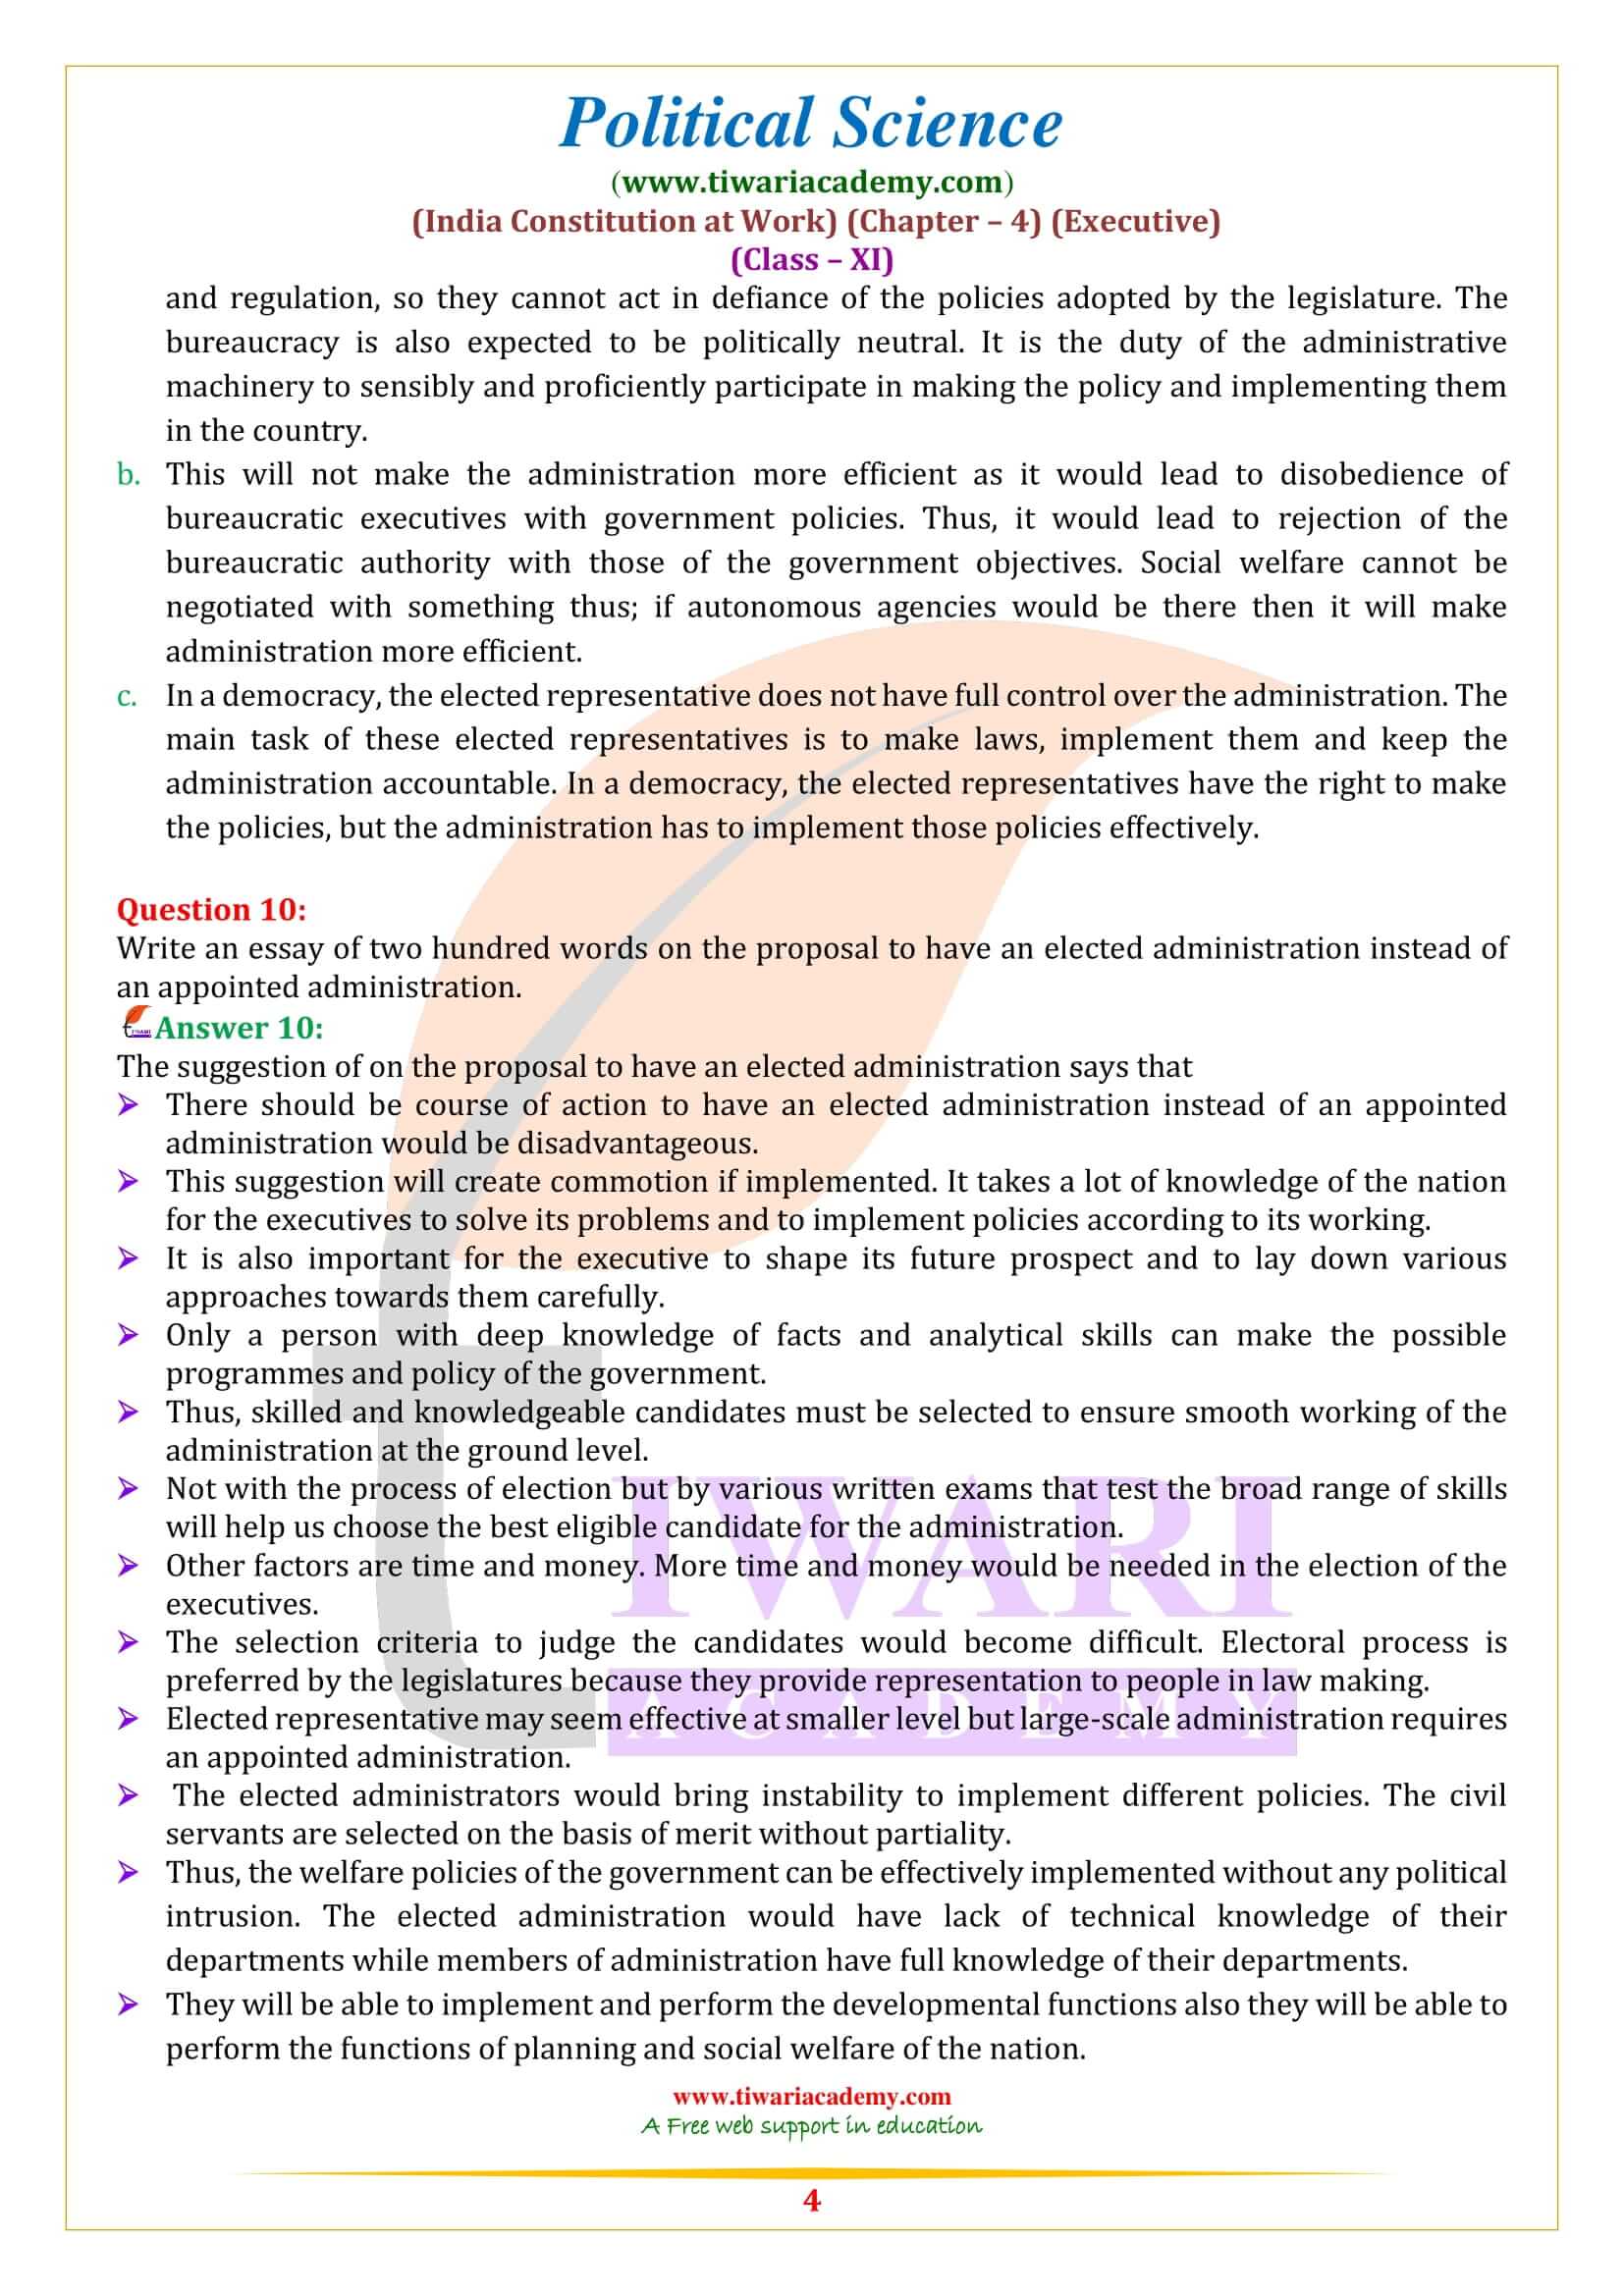 NCERT Solutions for Class 11 Political Science Chapter 4 in English Medium